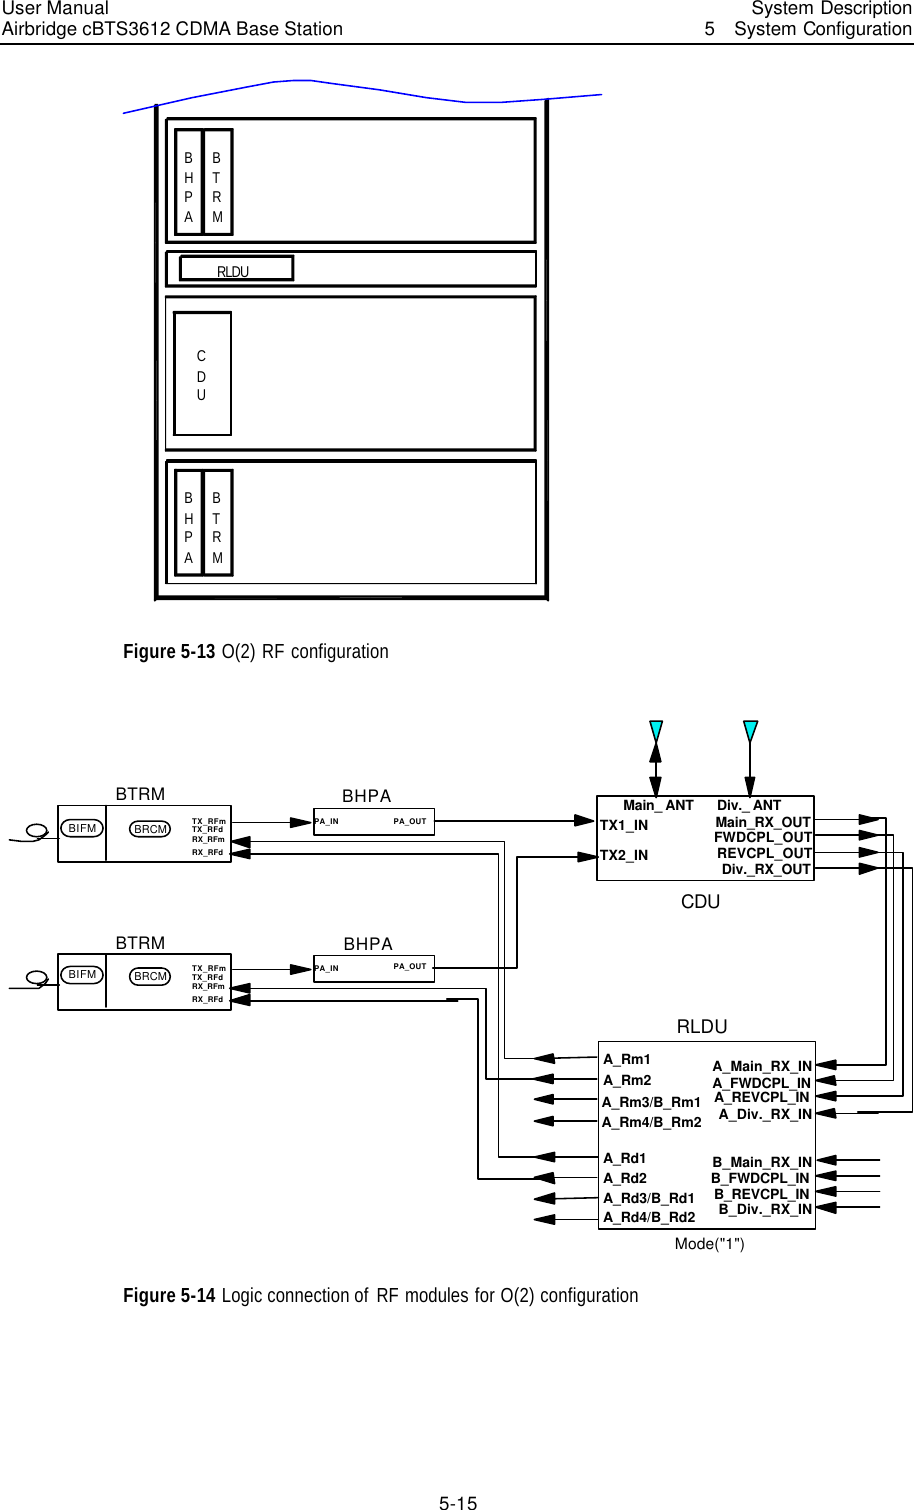 User Manual Airbridge cBTS3612 CDMA Base Station   System Description5  System Configuration 5-15 CDUBHPABTRMRLDUBHPABTRM Figure 5-13 O(2) RF configuration TX1_INTX2_INMain_ ANT Div._ ANTMain_RX_OUTDiv._RX_OUTFWDCPL_OUTREVCPL_OUTCDUA_Main_RX_INA_Div._RX_INA_FWDCPL_INA_REVCPL_INB_Main_RX_INB_Div._RX_INB_FWDCPL_INB_REVCPL_INA_Rm1A_Rm2A_Rm3/B_Rm1A_Rm4/B_Rm2A_Rd1A_Rd2A_Rd3/B_Rd1A_Rd4/B_Rd2RLDUMode(&quot;1&quot;)PA_IN PA_OUTBHPAPA_IN PA_OUTBHPABTRMTX_RFmRX_RFmRX_RFdBRCMBIFM TX_RFdBTRMTX_RFmRX_RFmRX_RFdBRCMBIFM TX_RFd Figure 5-14 Logic connection of  RF modules for O(2) configuration 